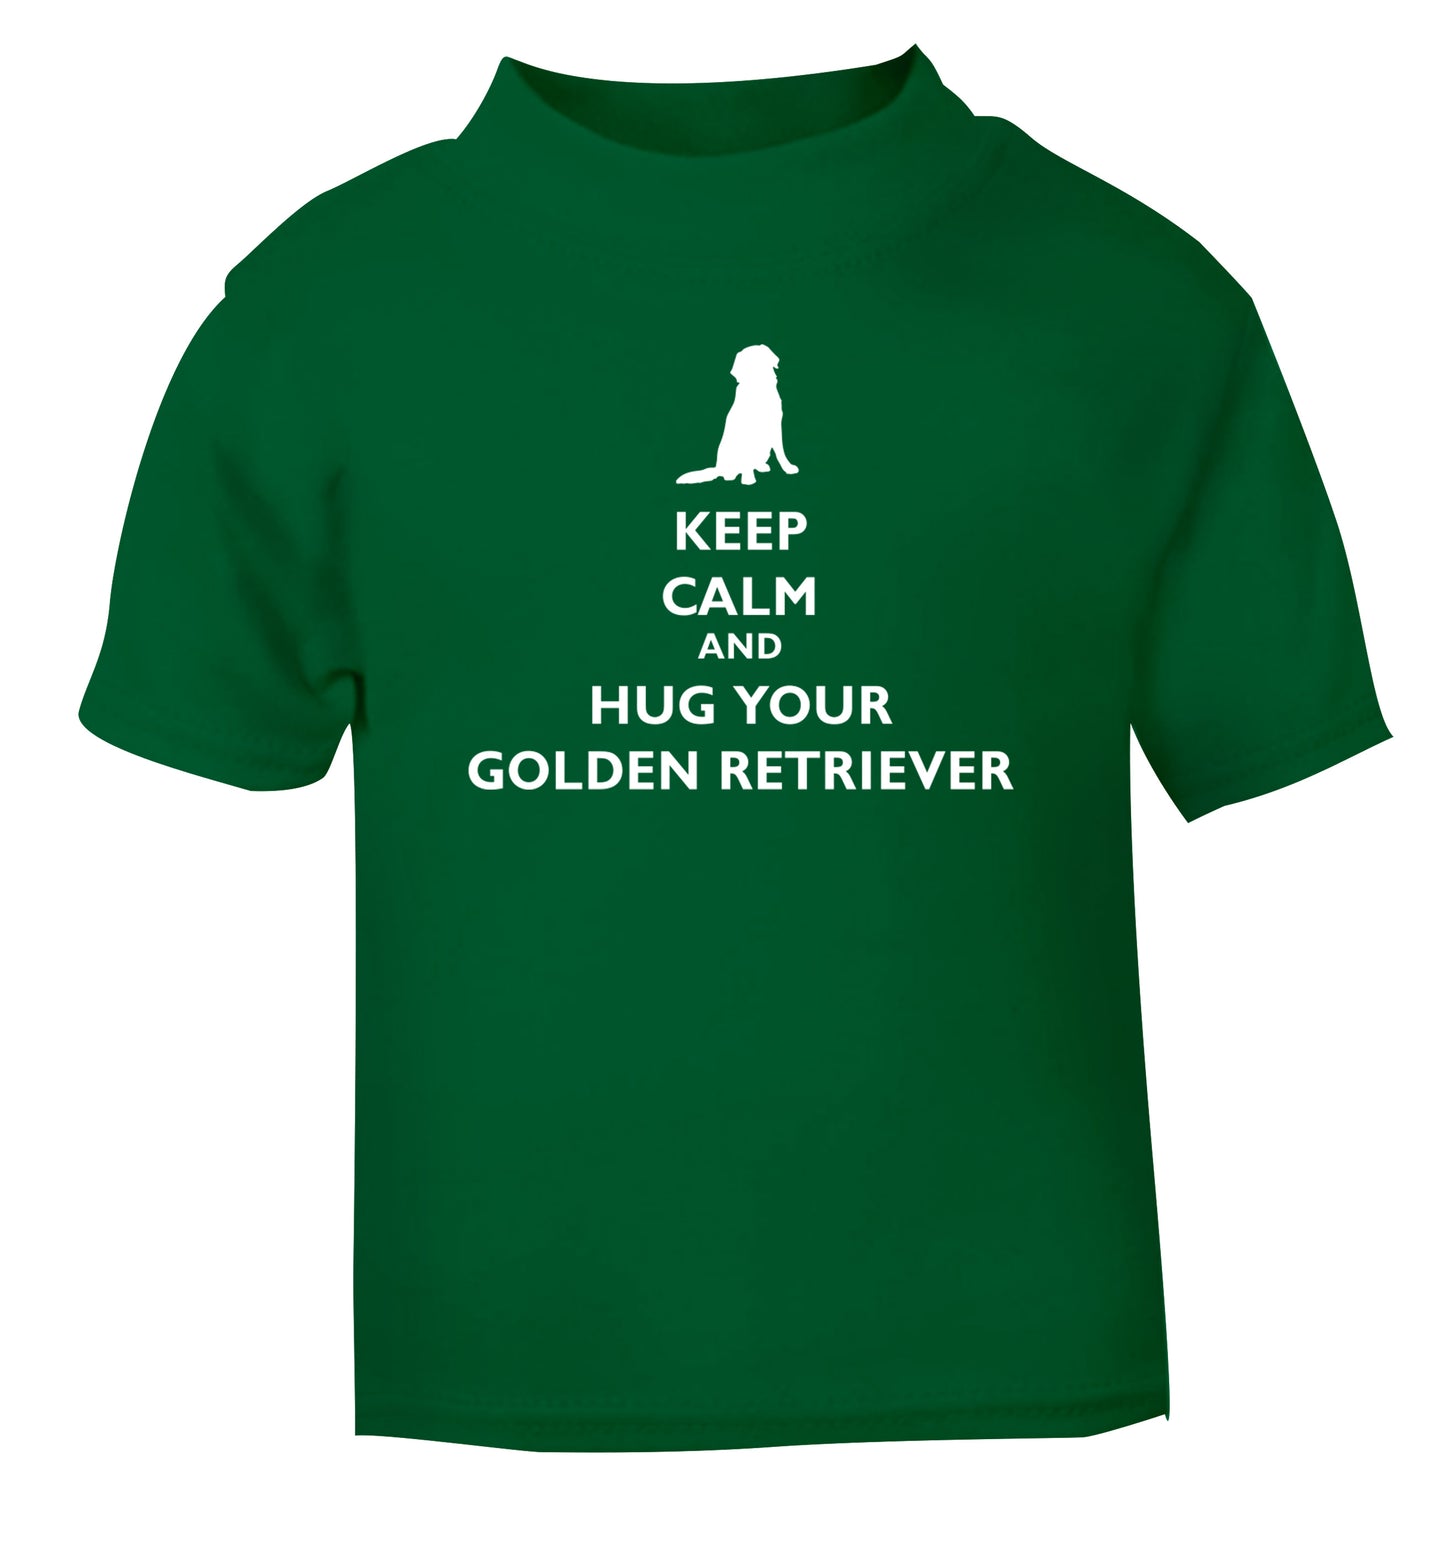 Keep calm and hug your golden retriever green Baby Toddler Tshirt 2 Years